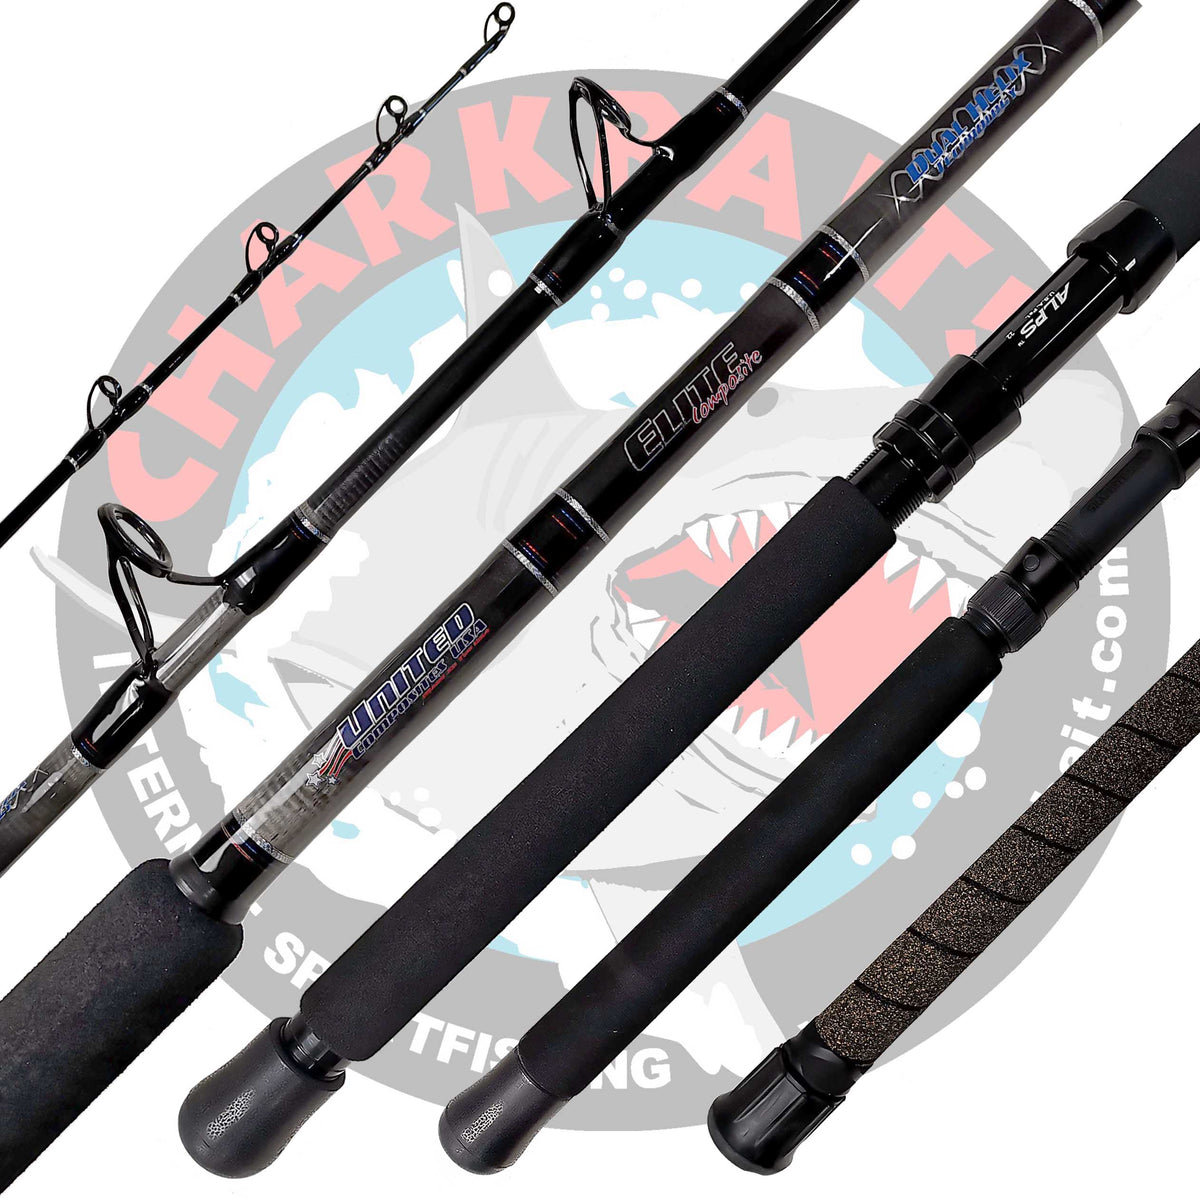 United Composites RCE 800 8ft Conventional Rods — Charkbait